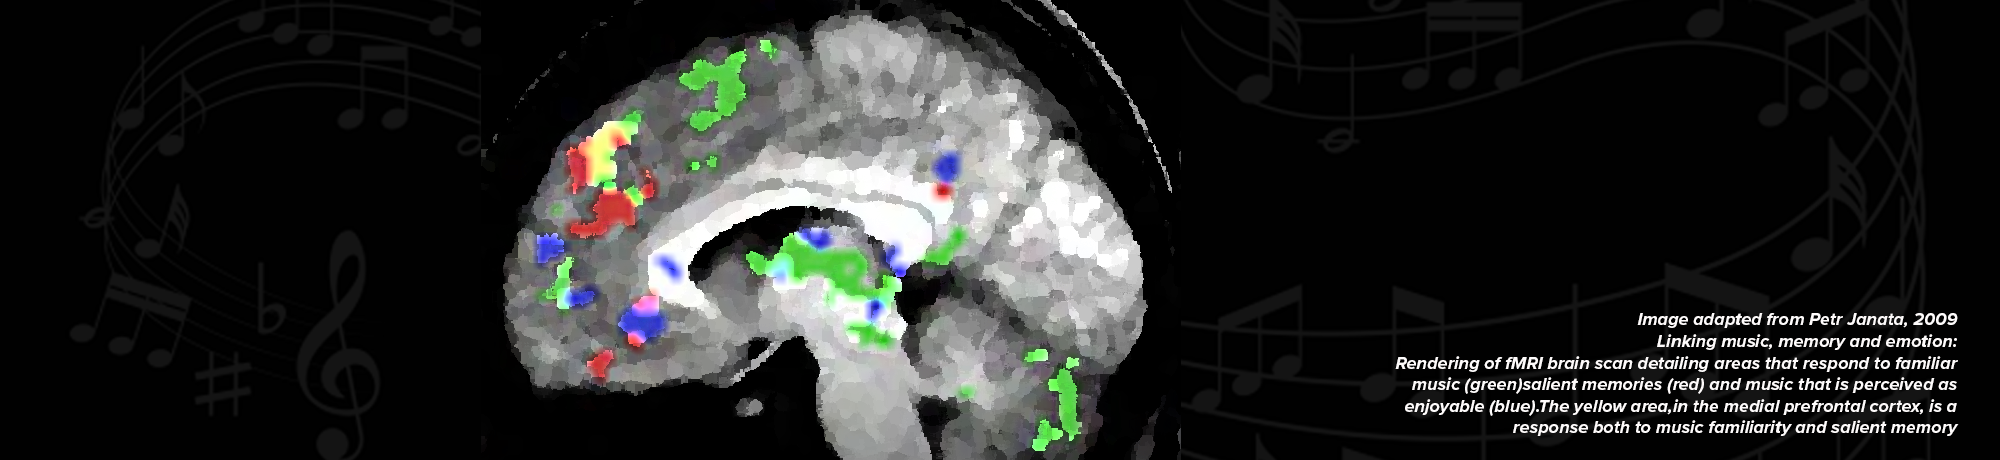 fMRI brain scan taken while participants listened to music